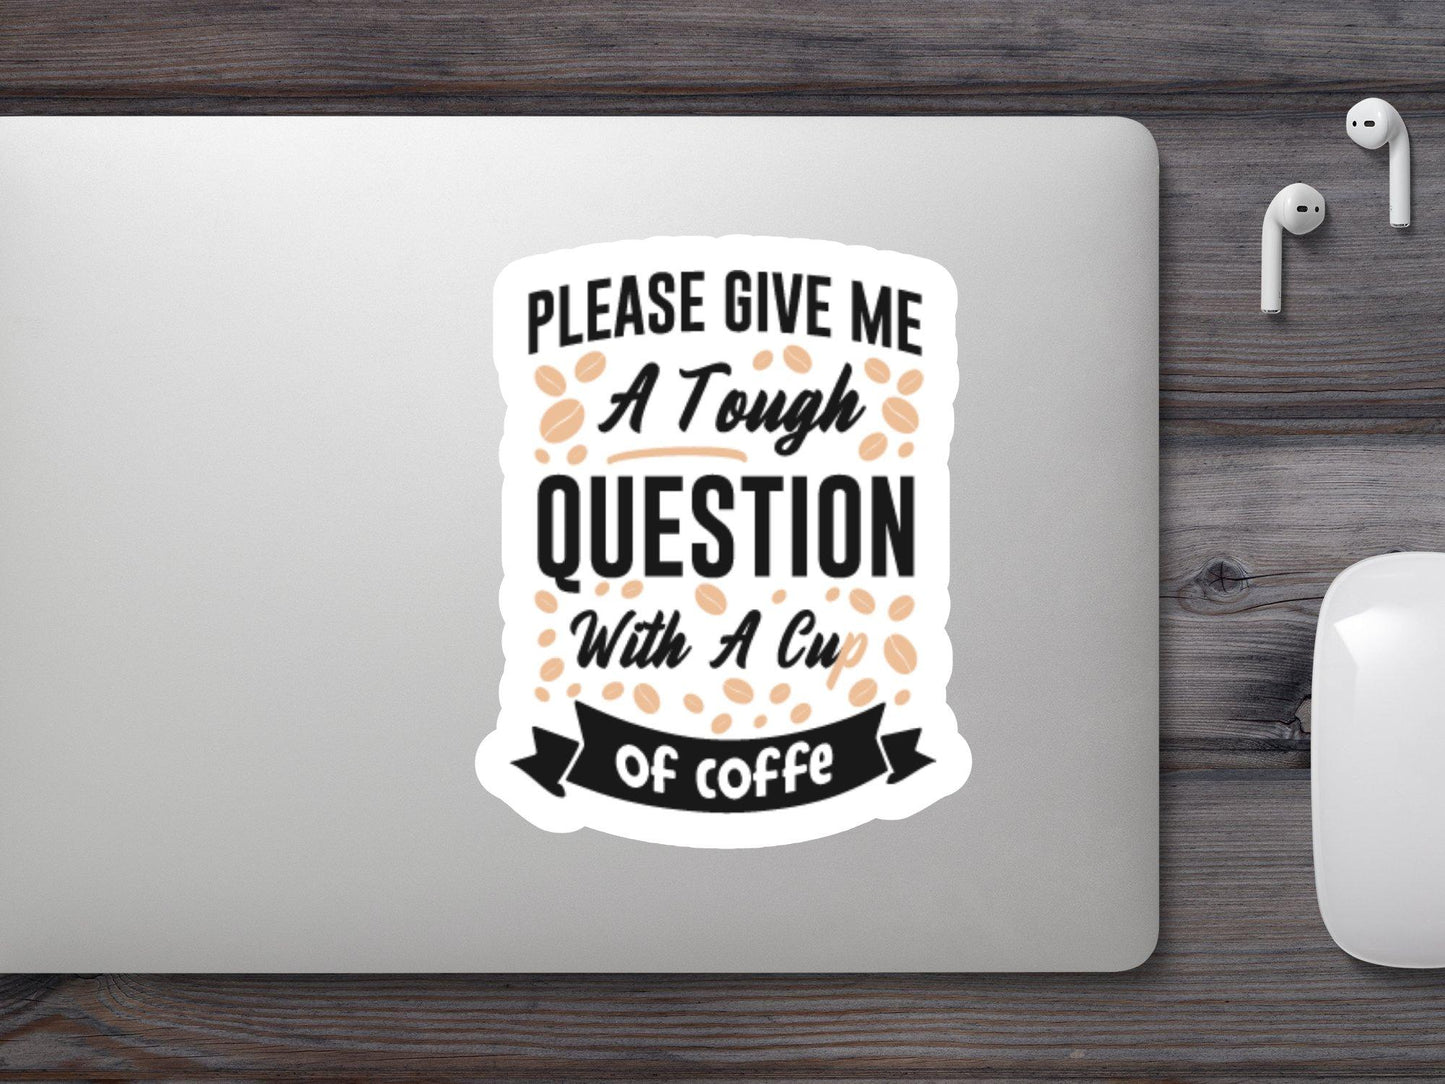 Please give Me Though Question With a Cup Of Coffee Sticker